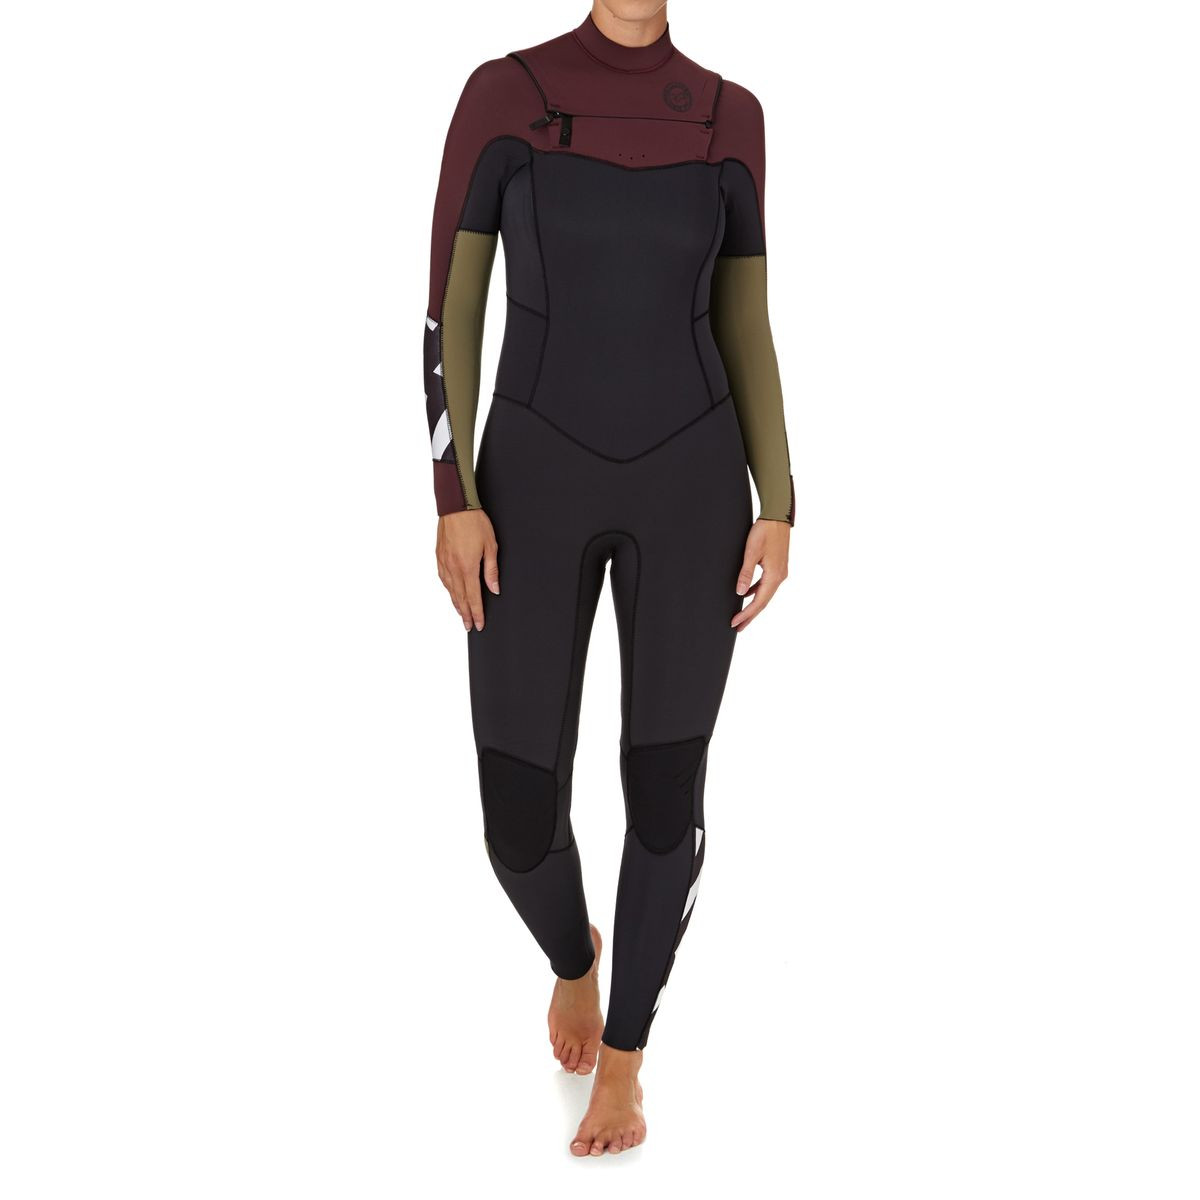 Billabong Womens Surf Capsule Salty Dayz 5/4mm 2018 Chest Zip Wetsuit - Mulberry